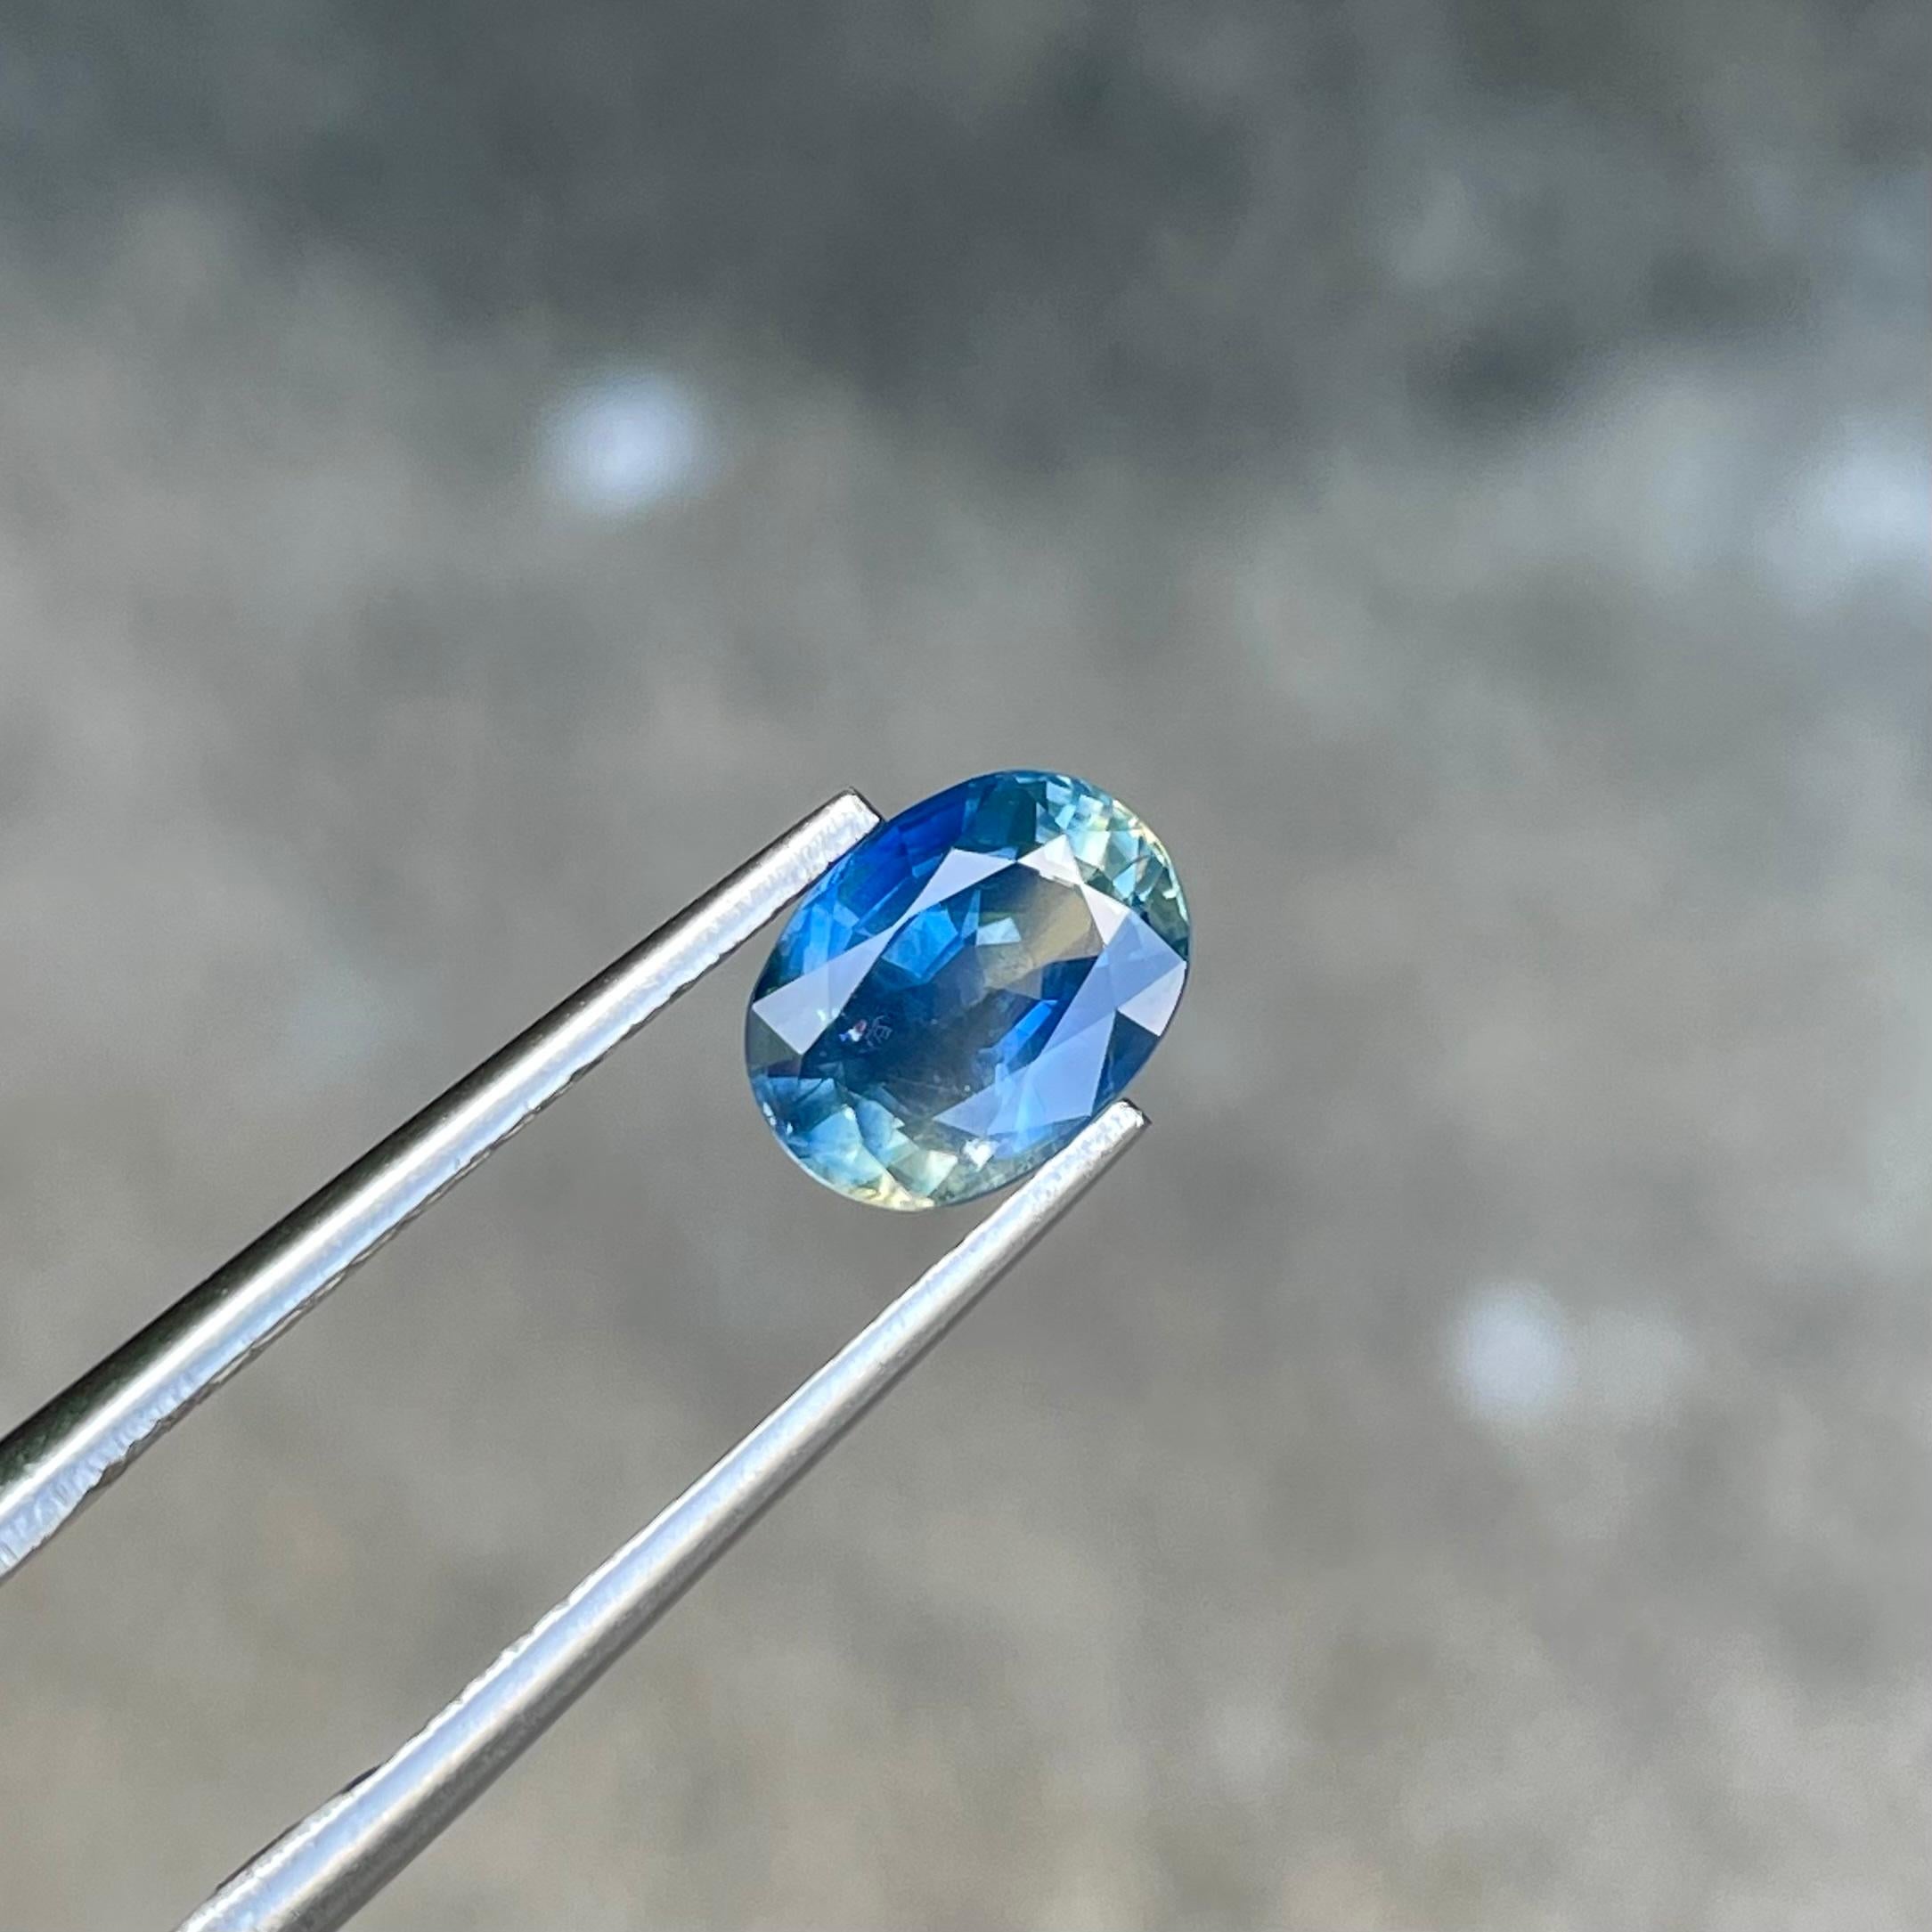 Weight 2.00 carats 
Dimensions 8.2x6.3x4.3 mm
Clarity: VVS
Treatment: Heat
Origin: Sri lanka
Shape: Oval
Cut: Step Oval




Introducing the Blue Sapphire Stone, a captivating gem of timeless allure and sophistication. This exquisite natural Sri